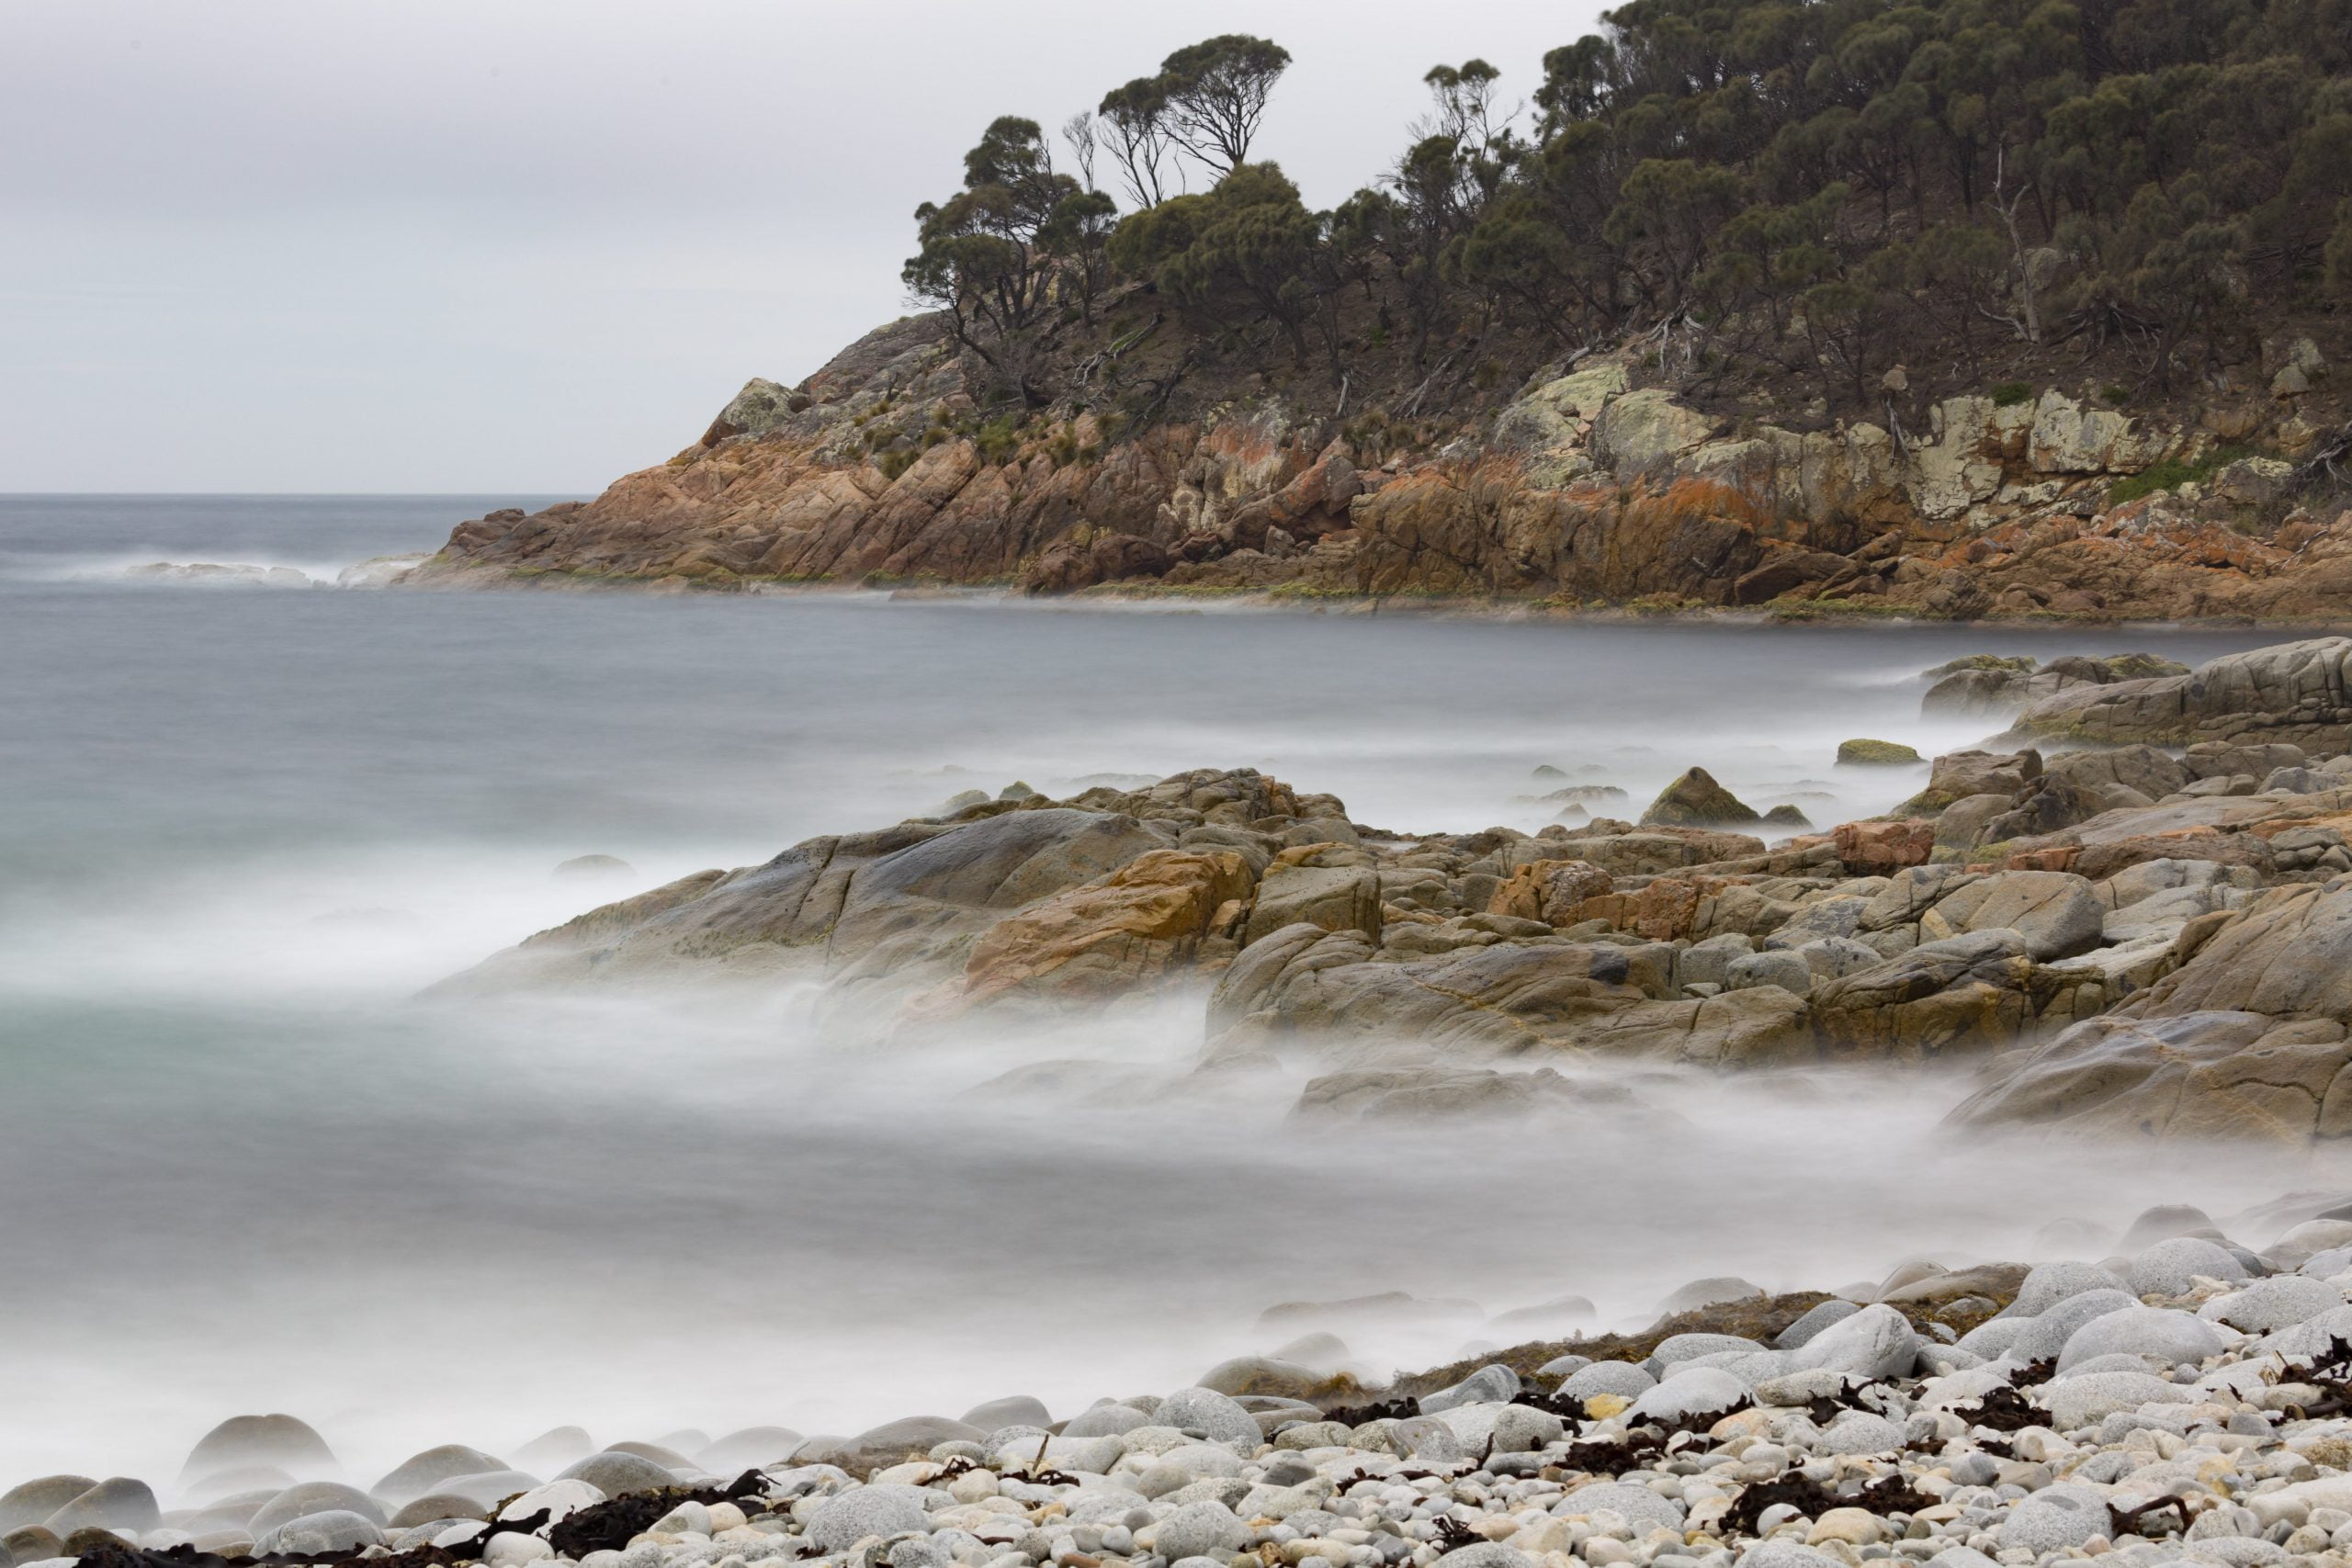 Here's a good example of compression in a landscape photo.  The three levels of land jutting into the sea are compressed together by the tendency of telephoto lenses to magnify images that are further away relative to the foreground.  This shot is taken with a 3 stop ND filter with the aperture at f16  to slow the shutter to 30 seconds.  This creates the softness in the water, and also gives enough depth of field to include both the foreground and background.